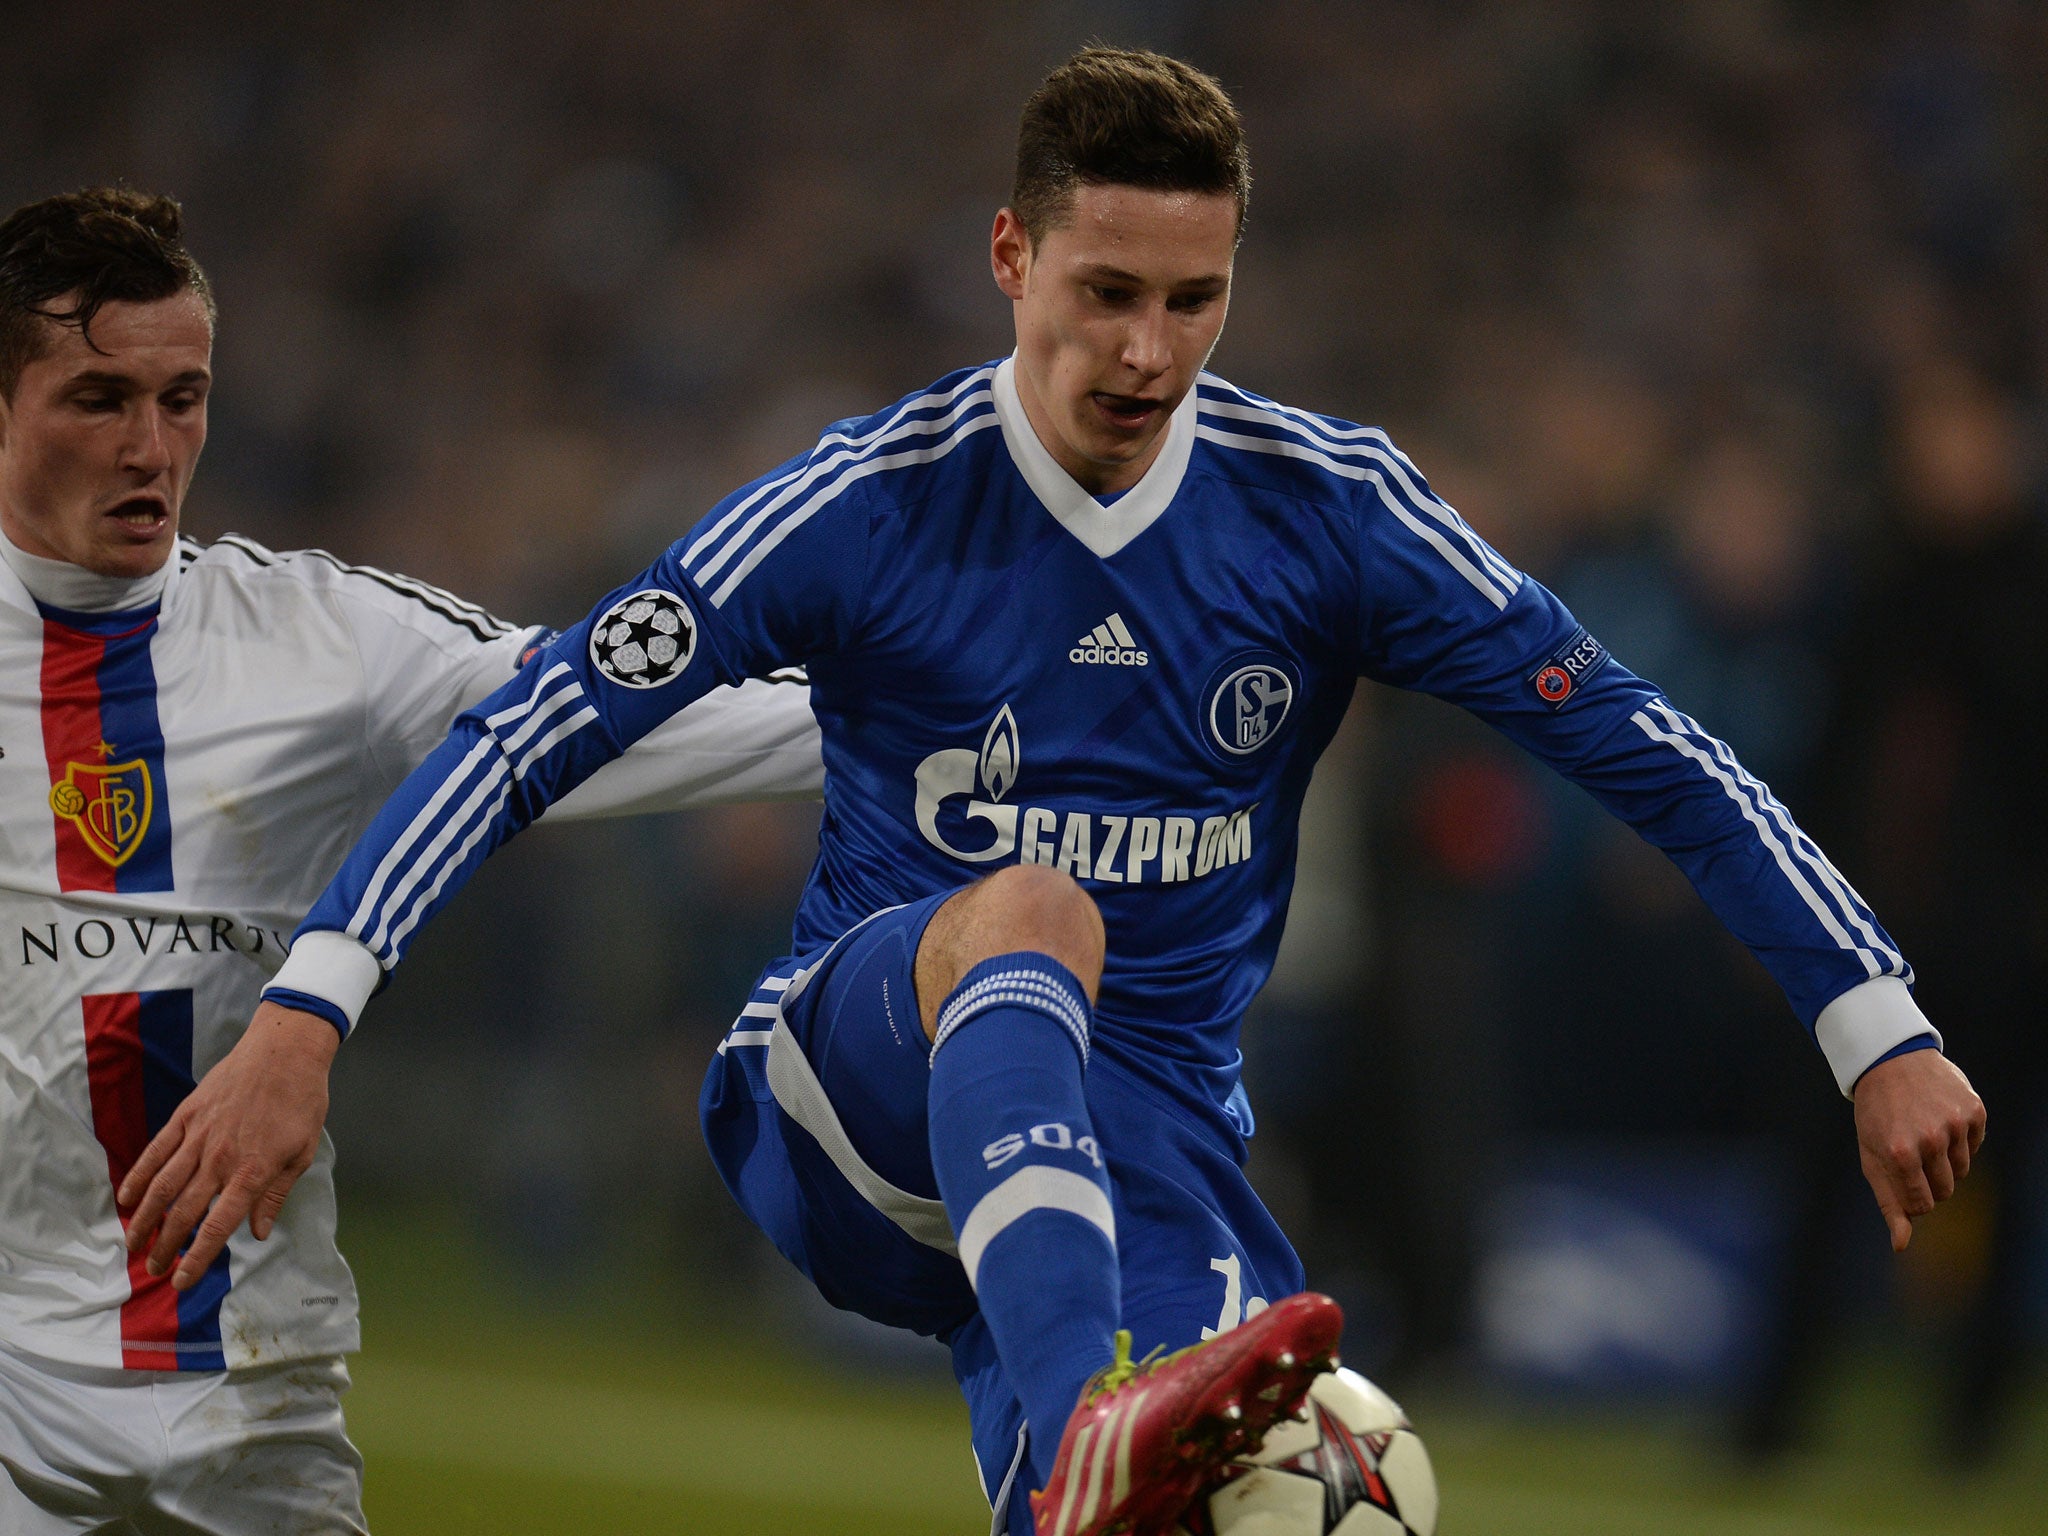 Julian Draxler, in blue, has been valued at £37m, which is too high a risk for a 20-year-old